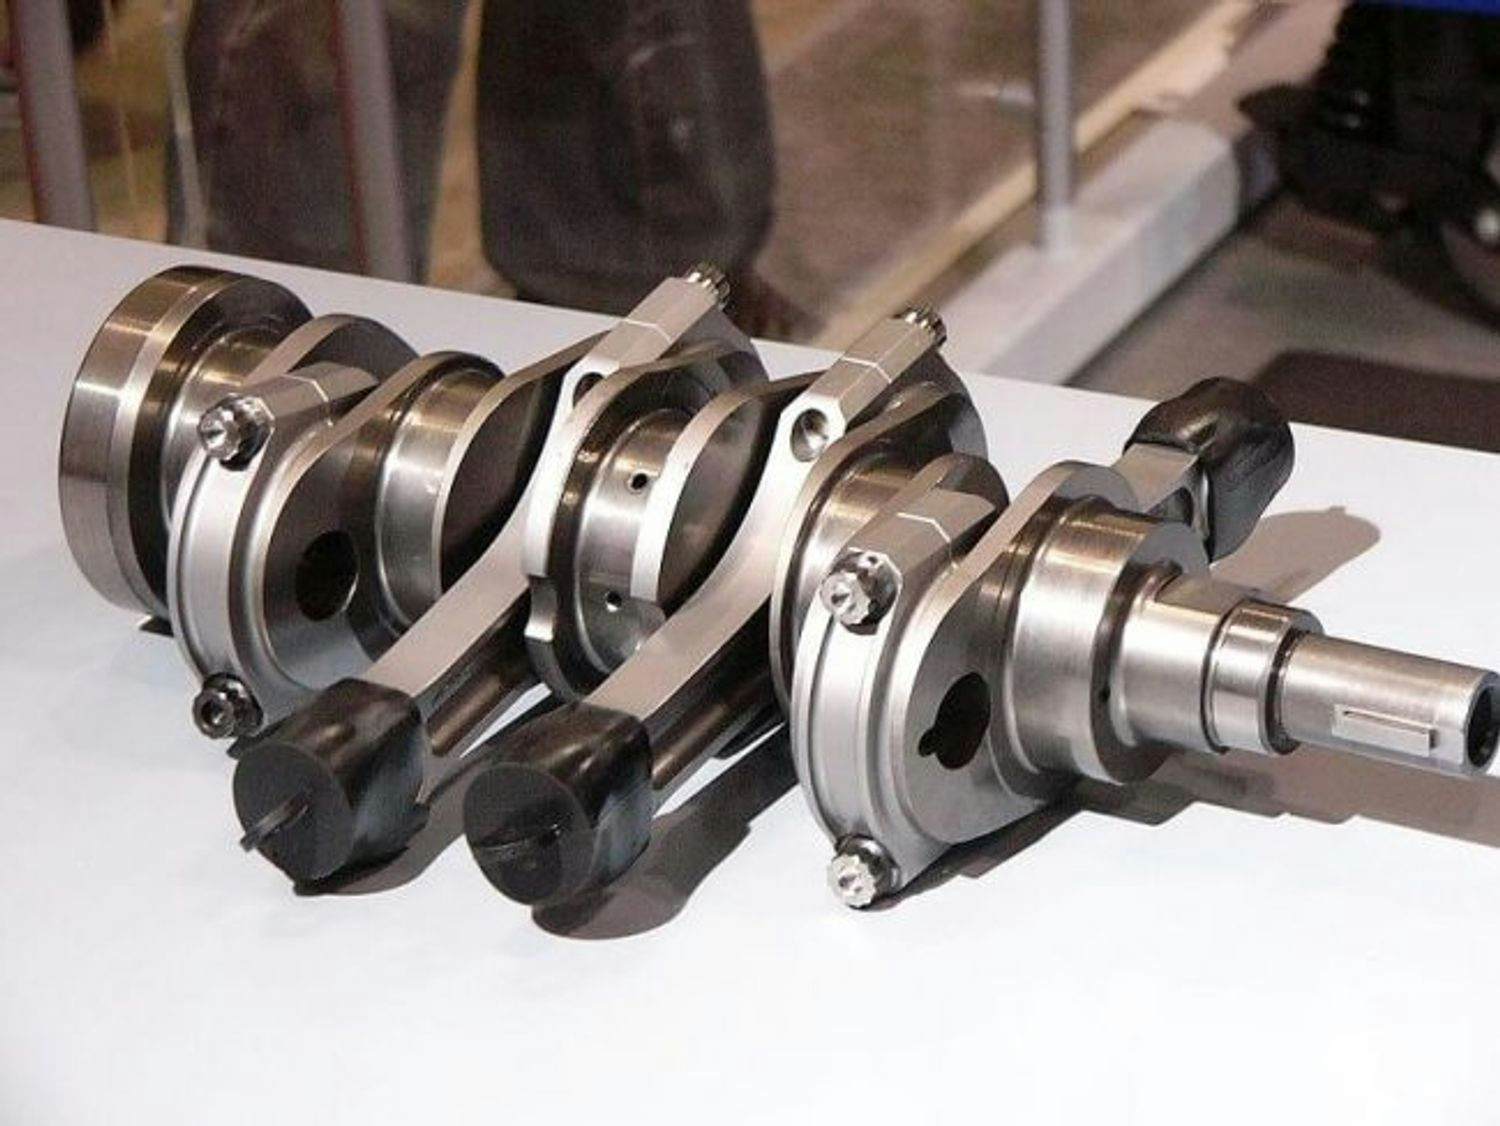 Crankshaft: What is it for, and what forces must it withstand?